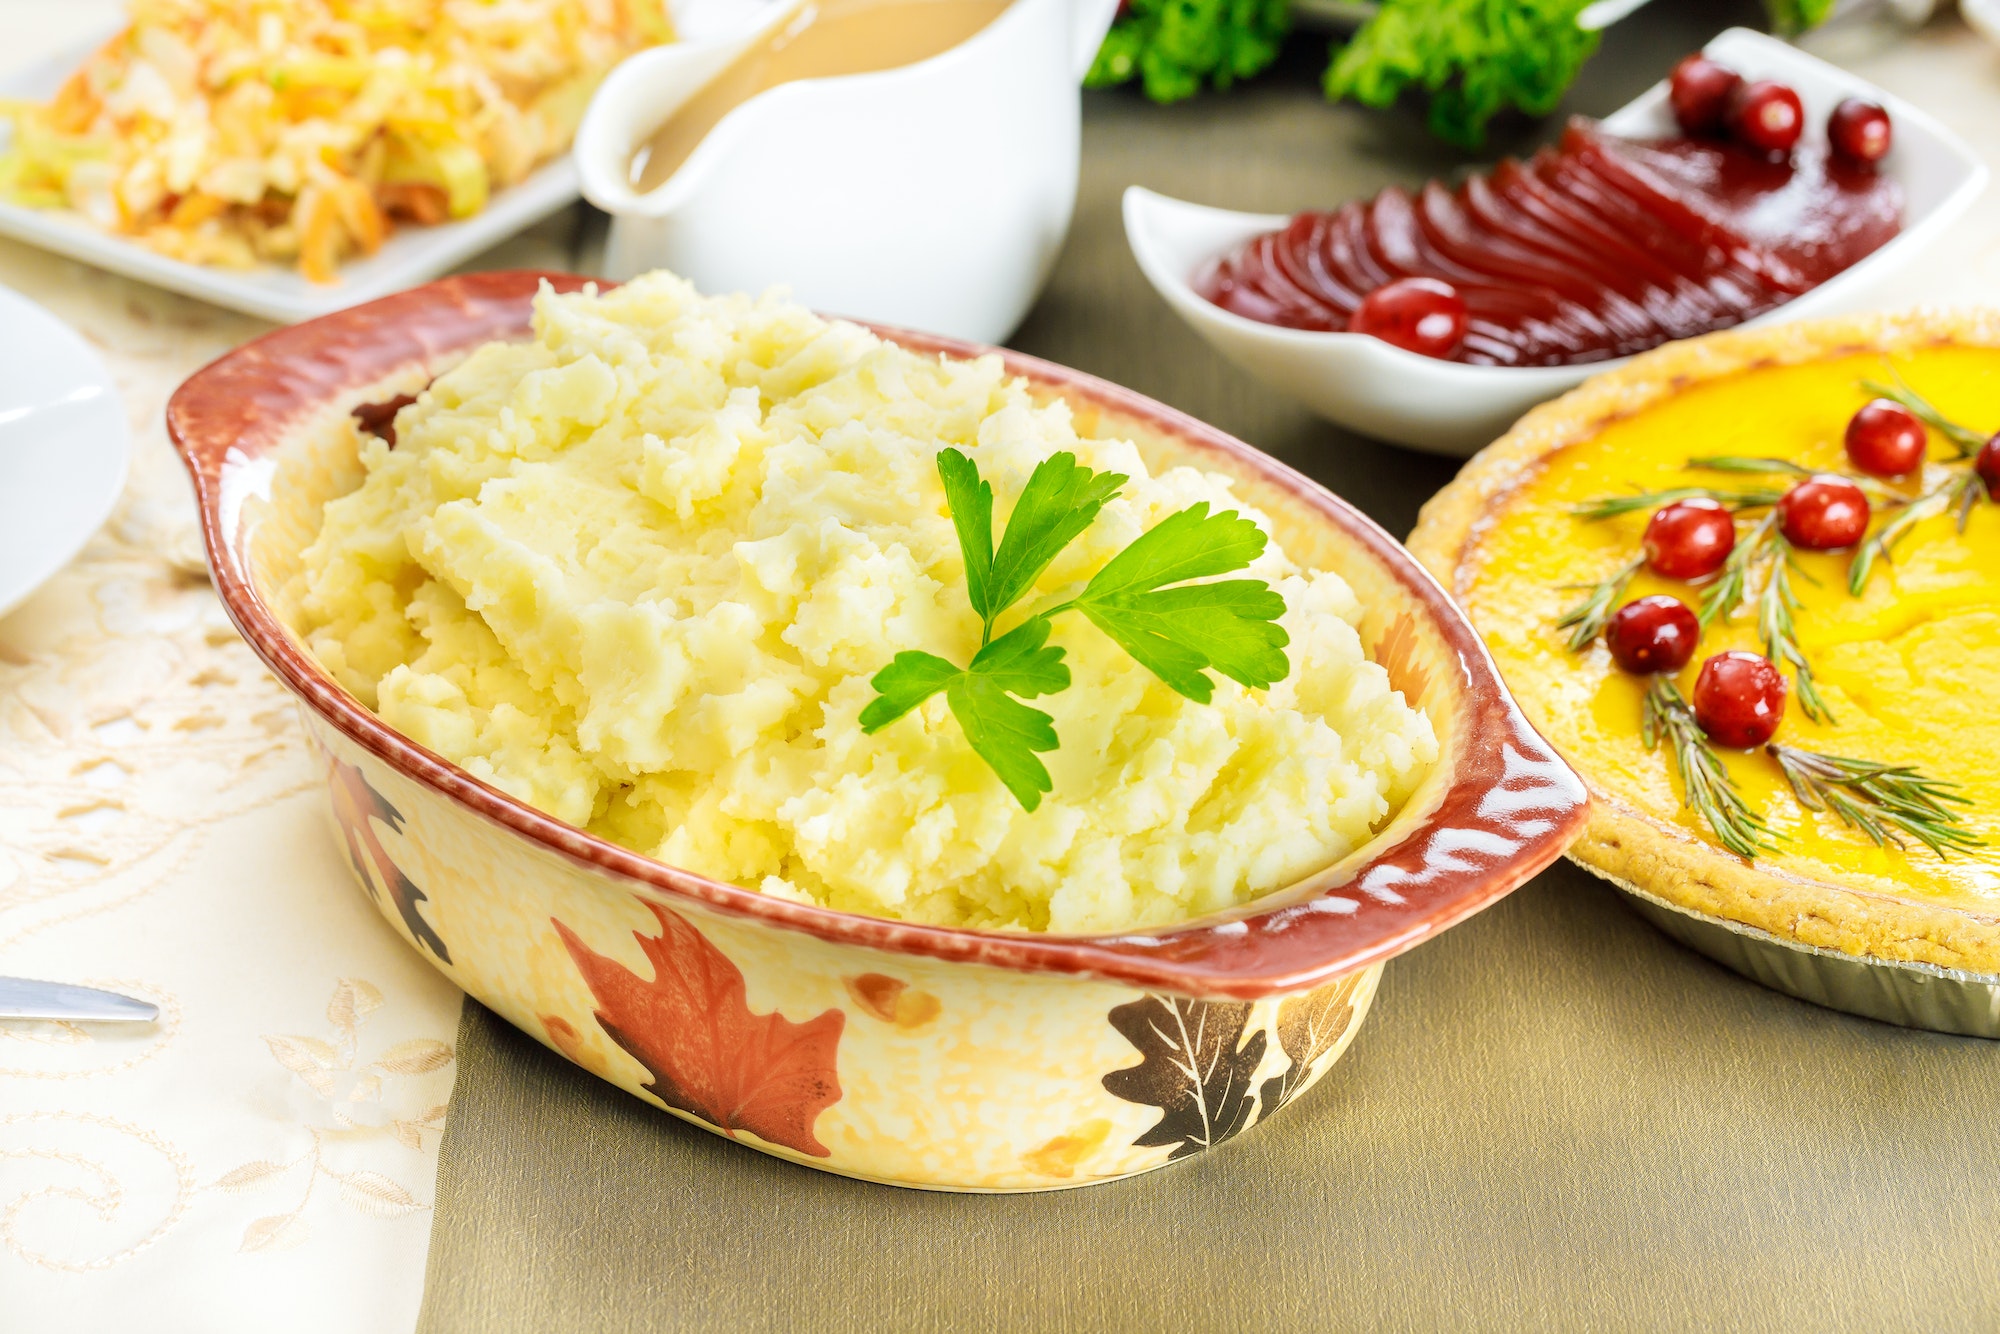 Mashed potatoes on festive dinner table for Thanksgiving Day.